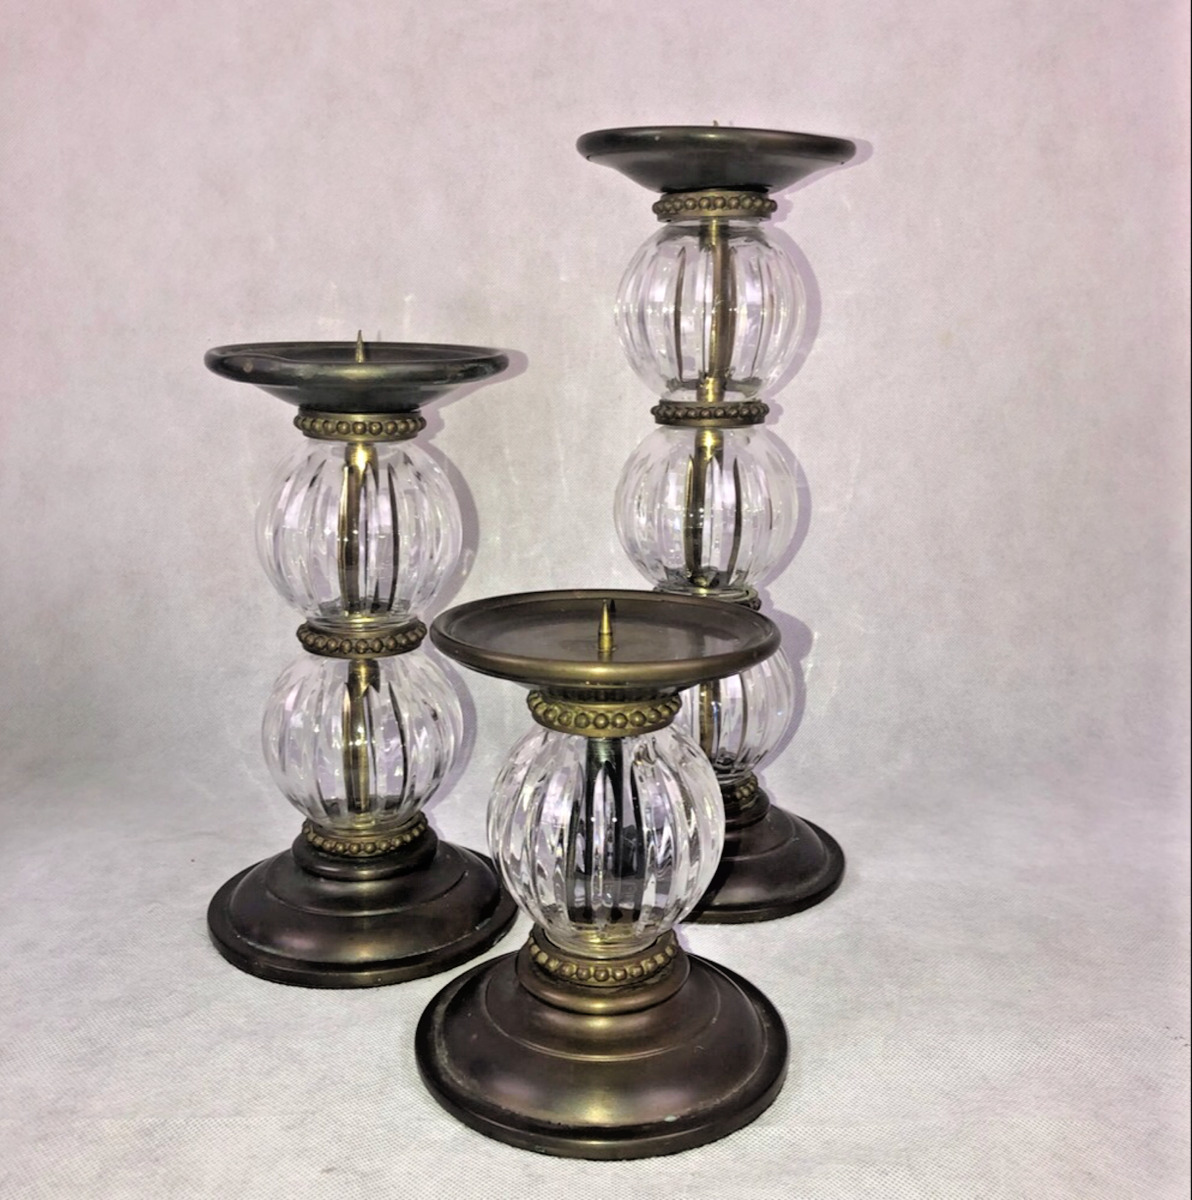 Antique vintage Gorgeous bronze and crystal candle holders set of 3